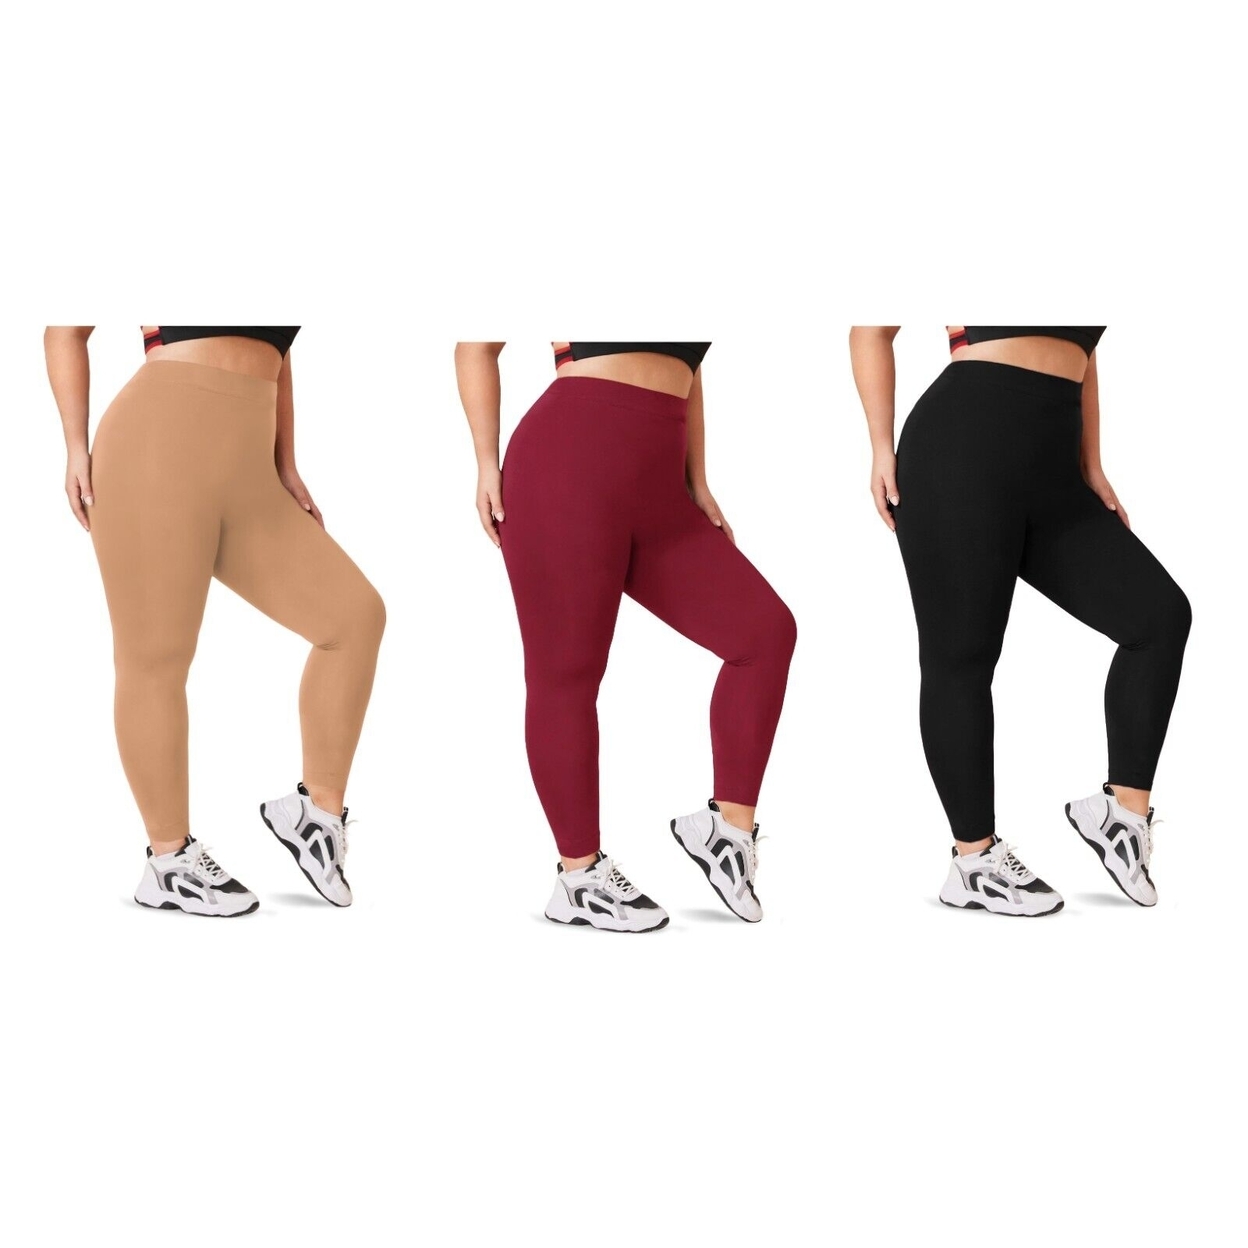 Multi-Pack: Women's Casual Ultra-Soft Smooth High Waisted Athletic Active Yoga Leggings Plus Size Available - 1-pack, 4x